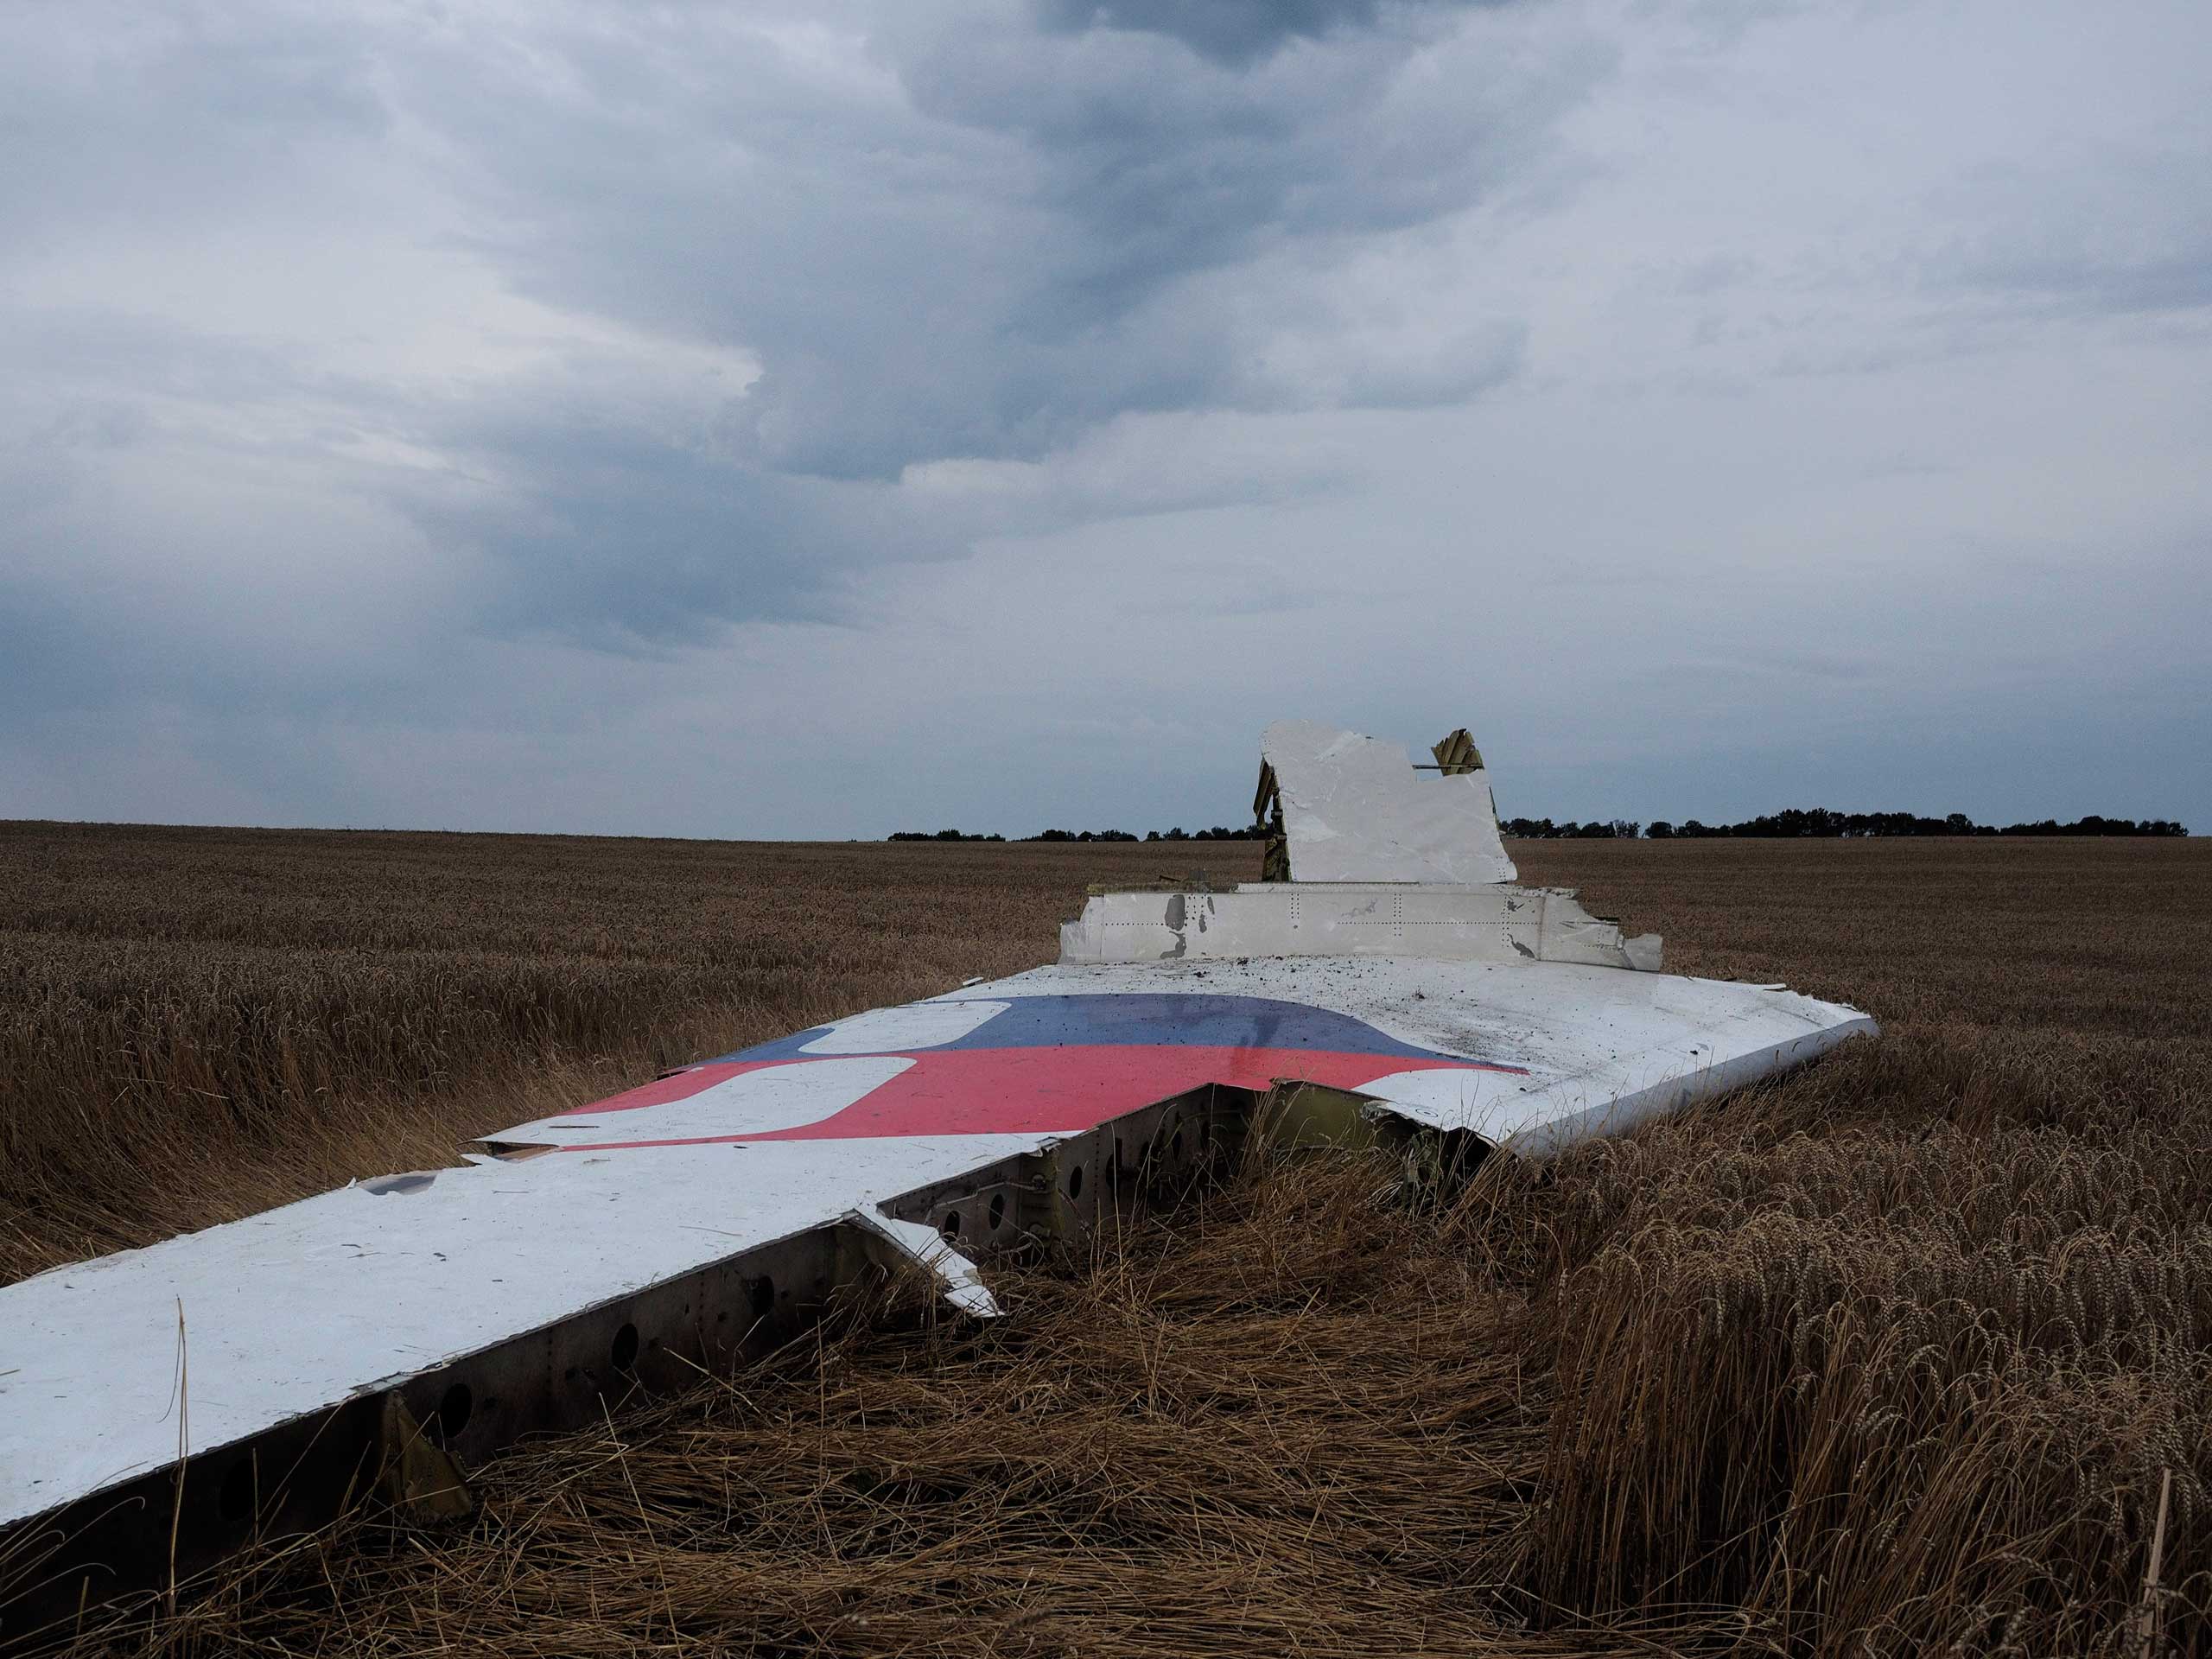 The wreckage of the Malaysian airliner carrying 298 people from Amsterdam to Kuala Lumpur after it crashed, near the town of Shaktarsk, in rebel-held east Ukraine, July 17, 2014.